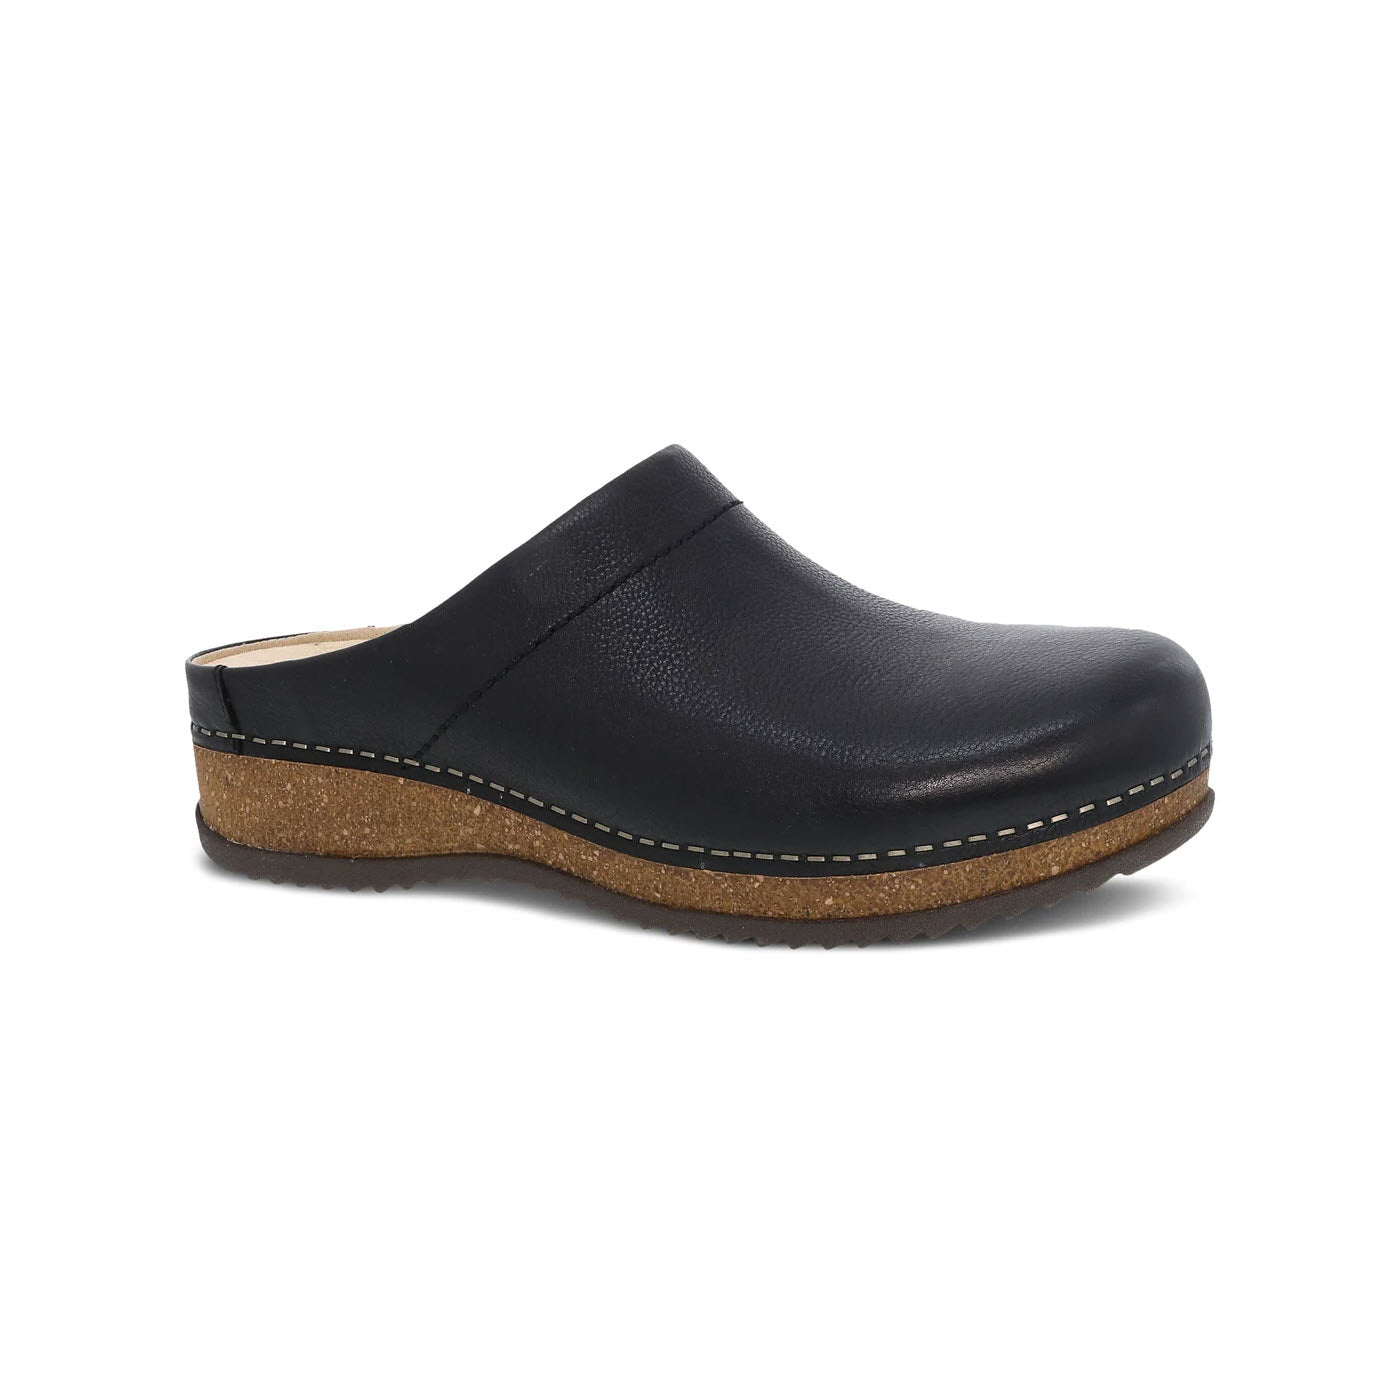 Dansko Mariella open back clog with a wooden sole on a white background.